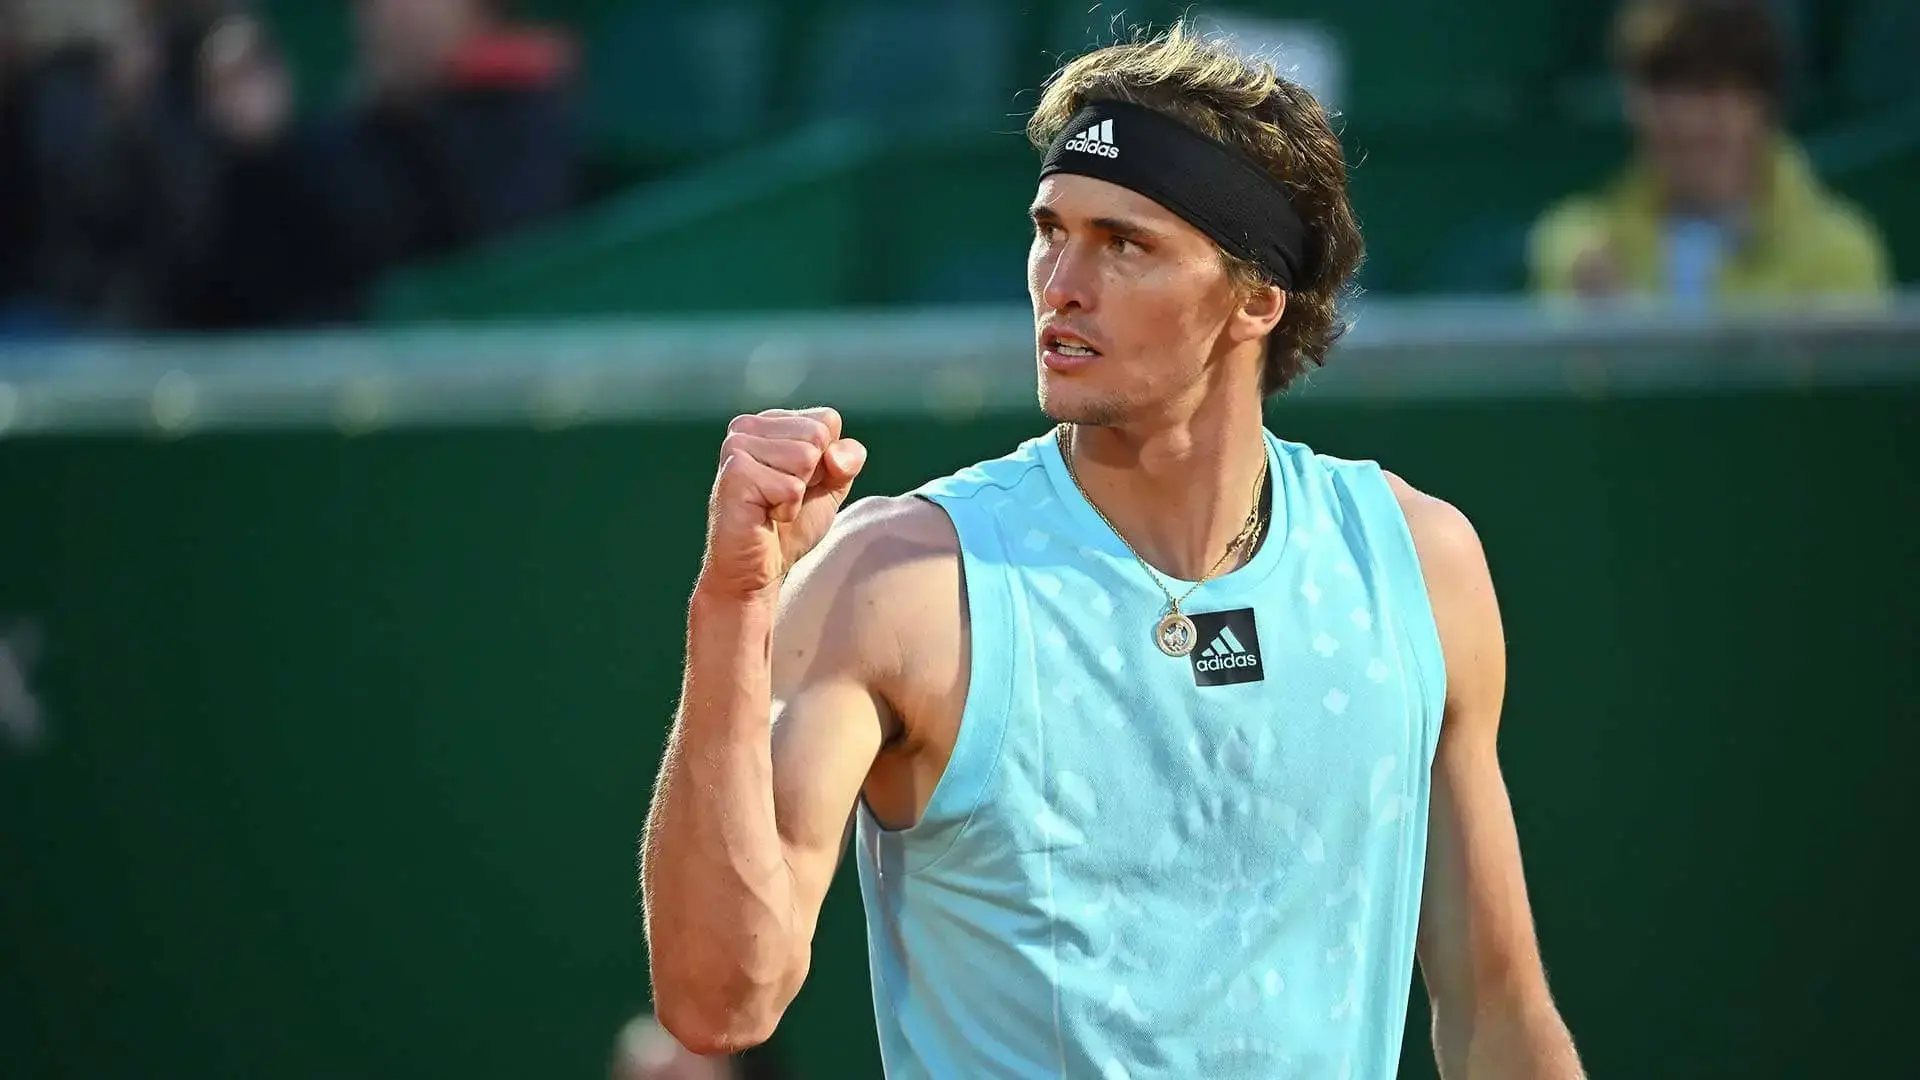 The resounding return of Alexander Zverev after 188 days out due to injury
